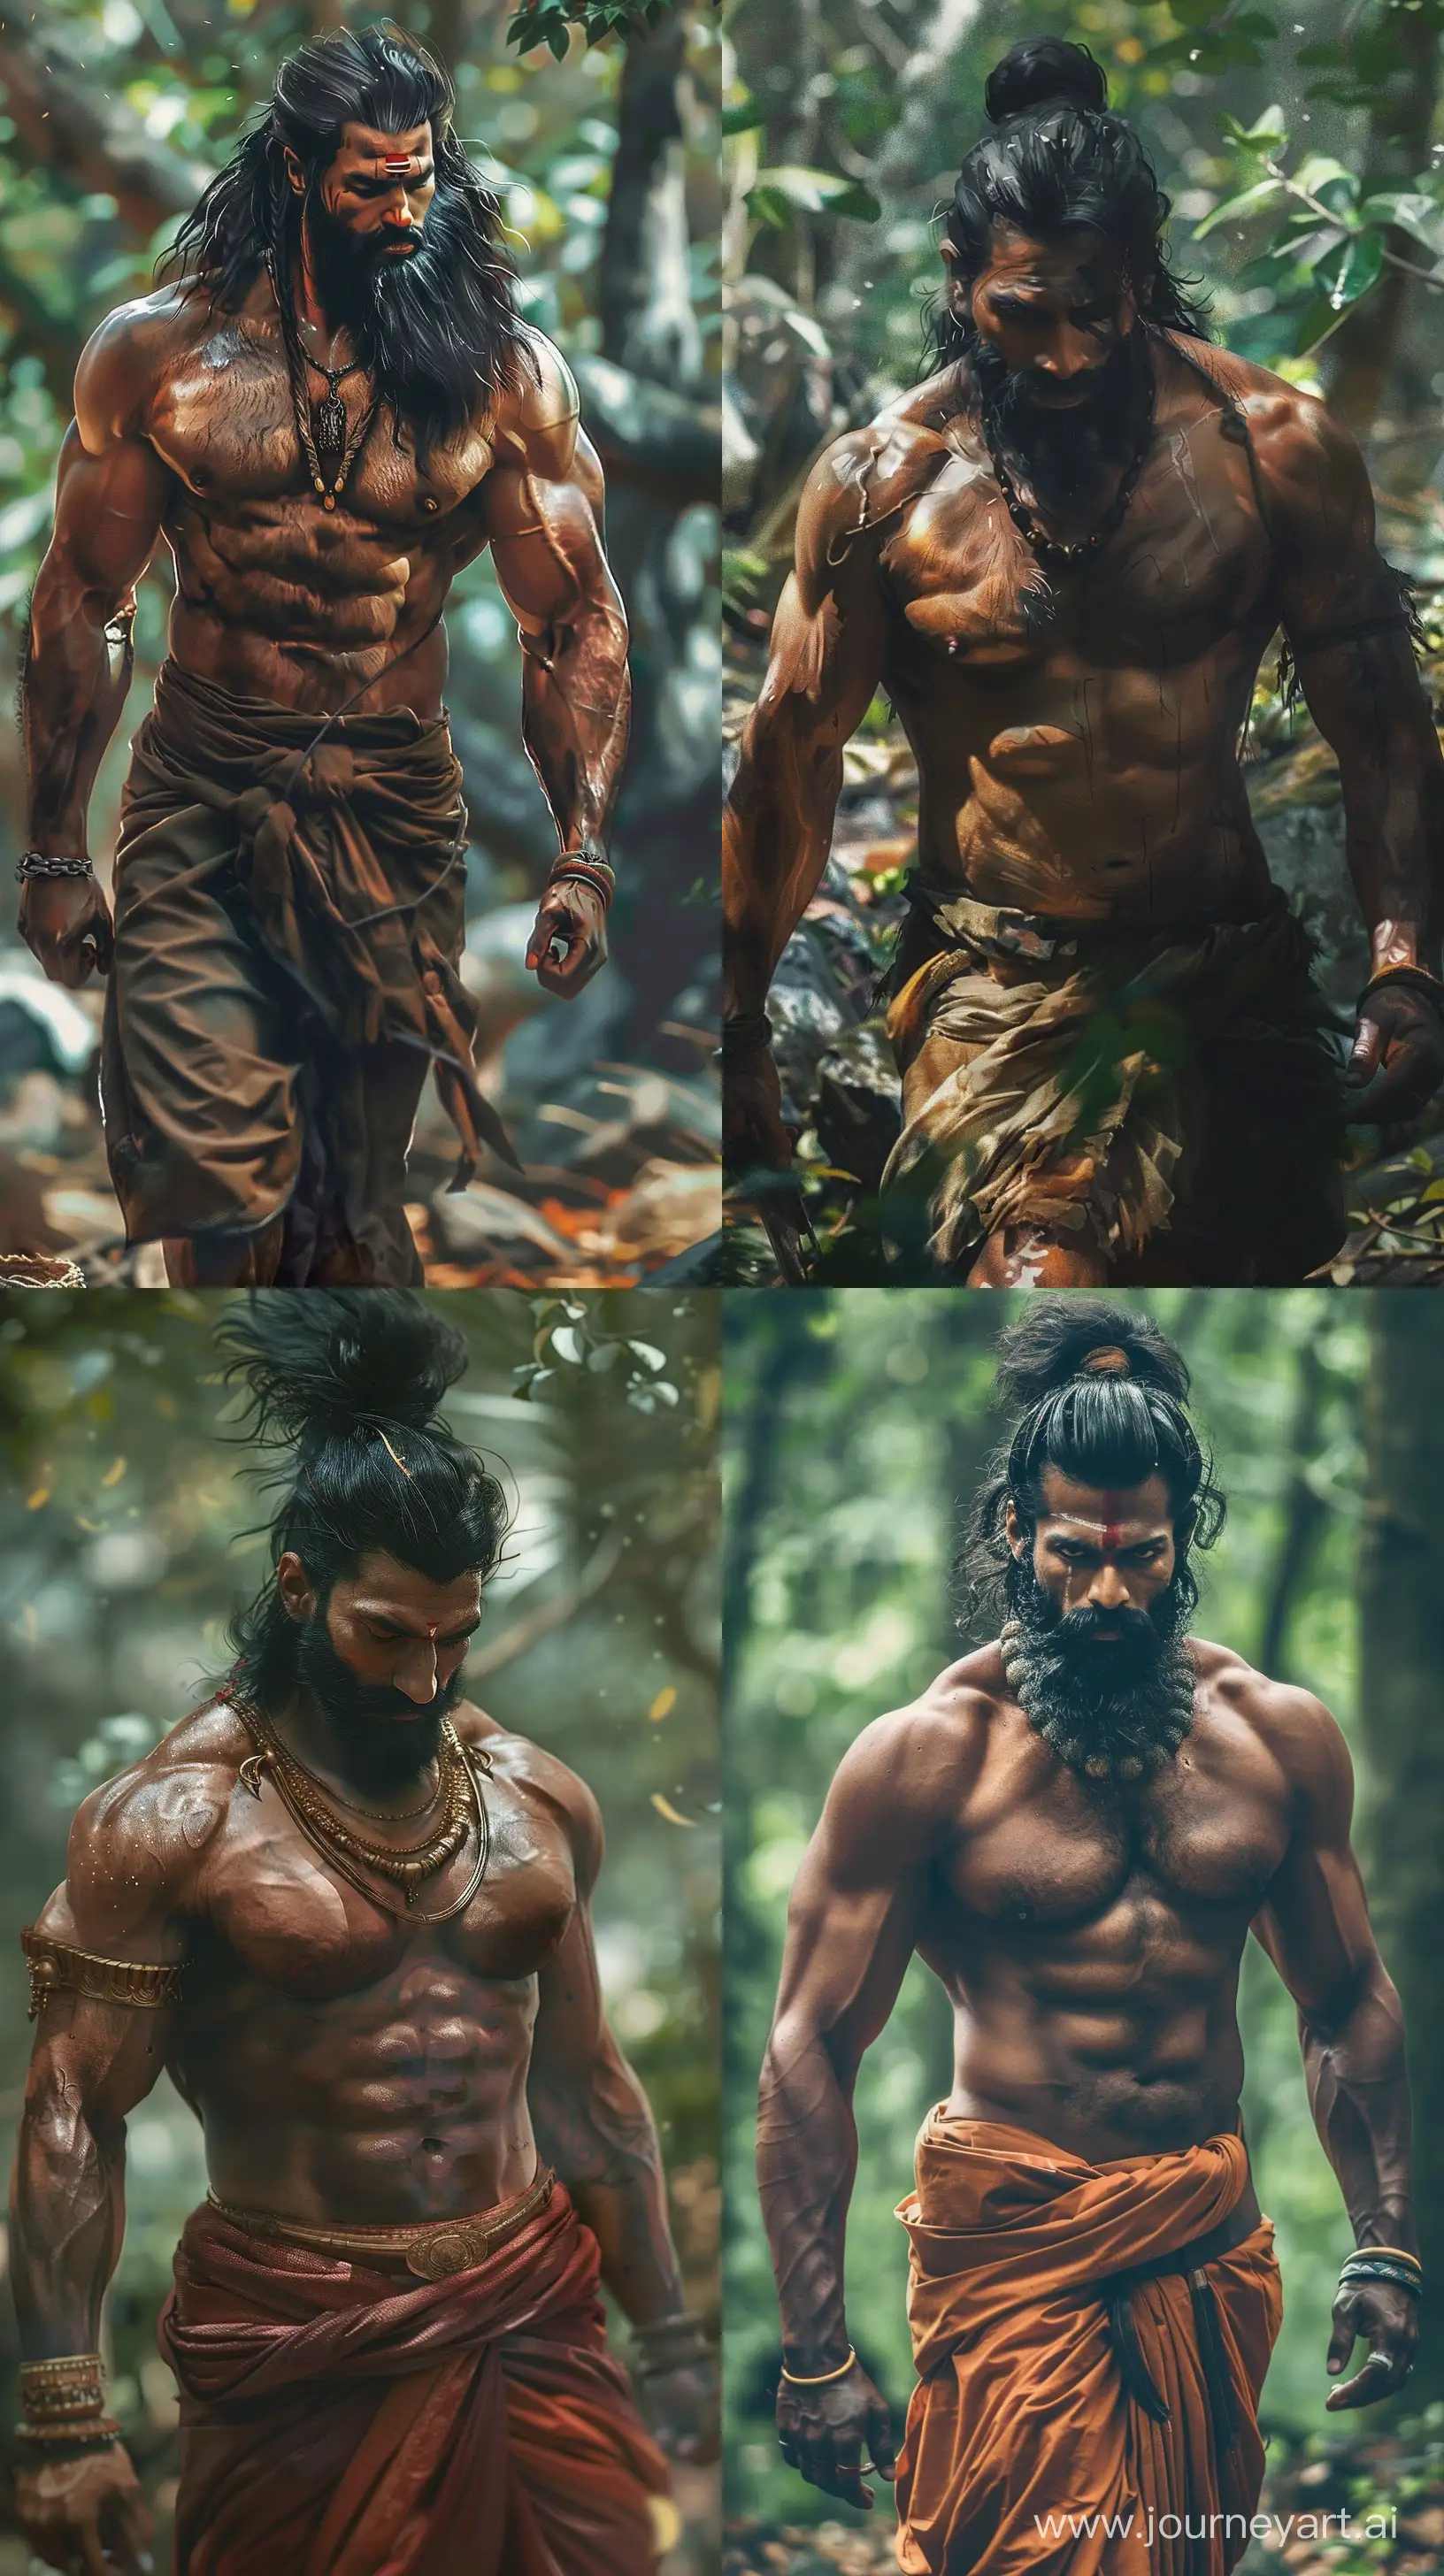 Ancient-Indian-Warrior-Strolling-Through-Vibrant-Forest